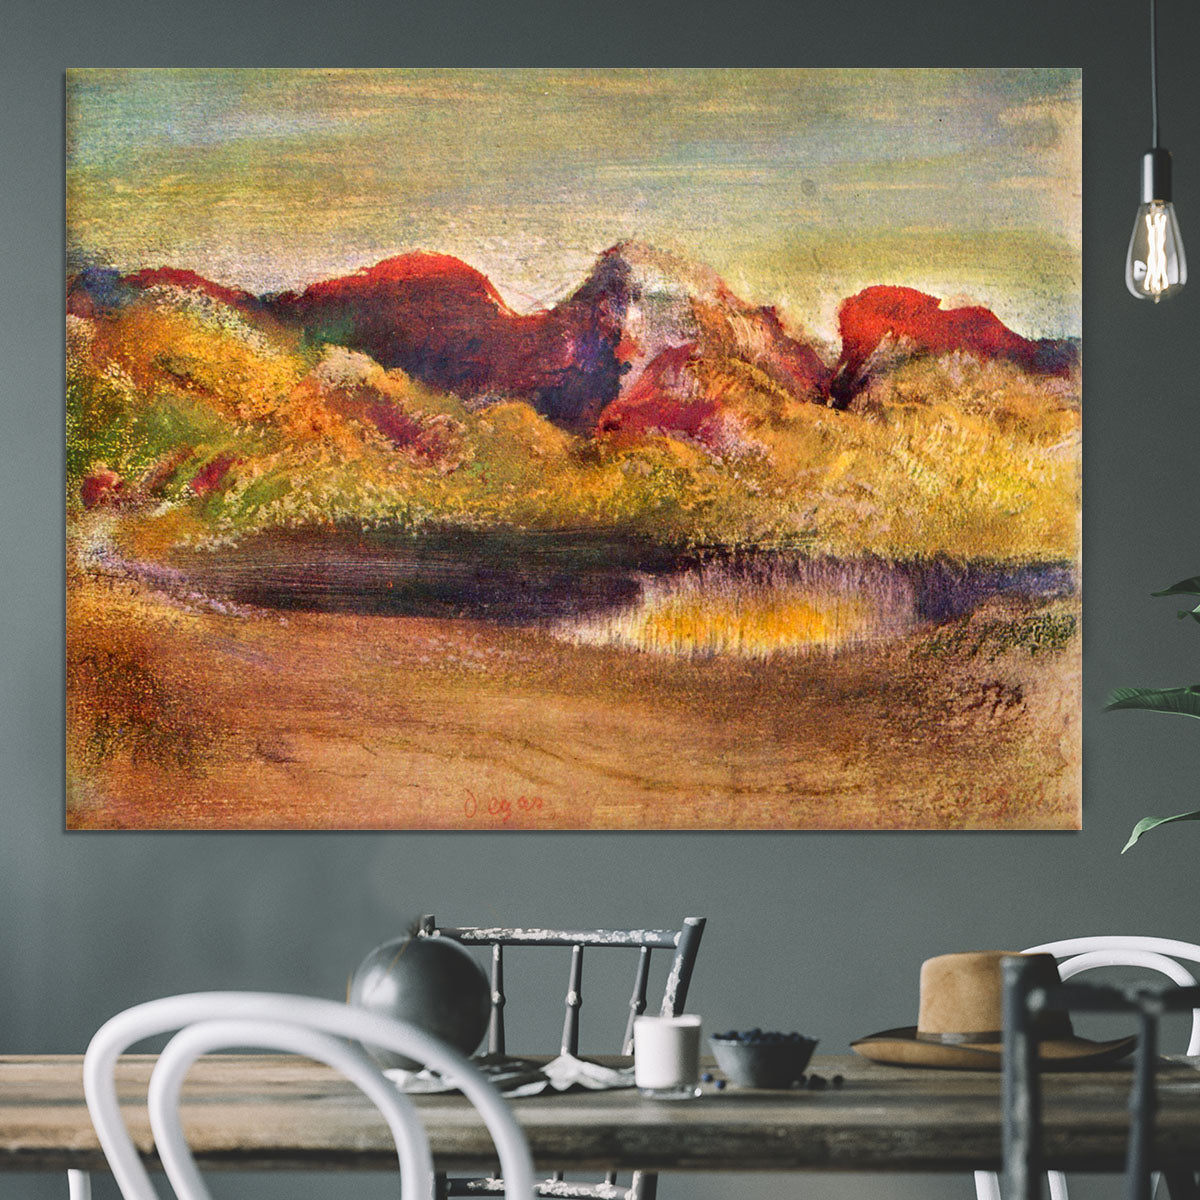 Lake and mountains by Degas Canvas Print or Poster - Canvas Art Rocks - 3